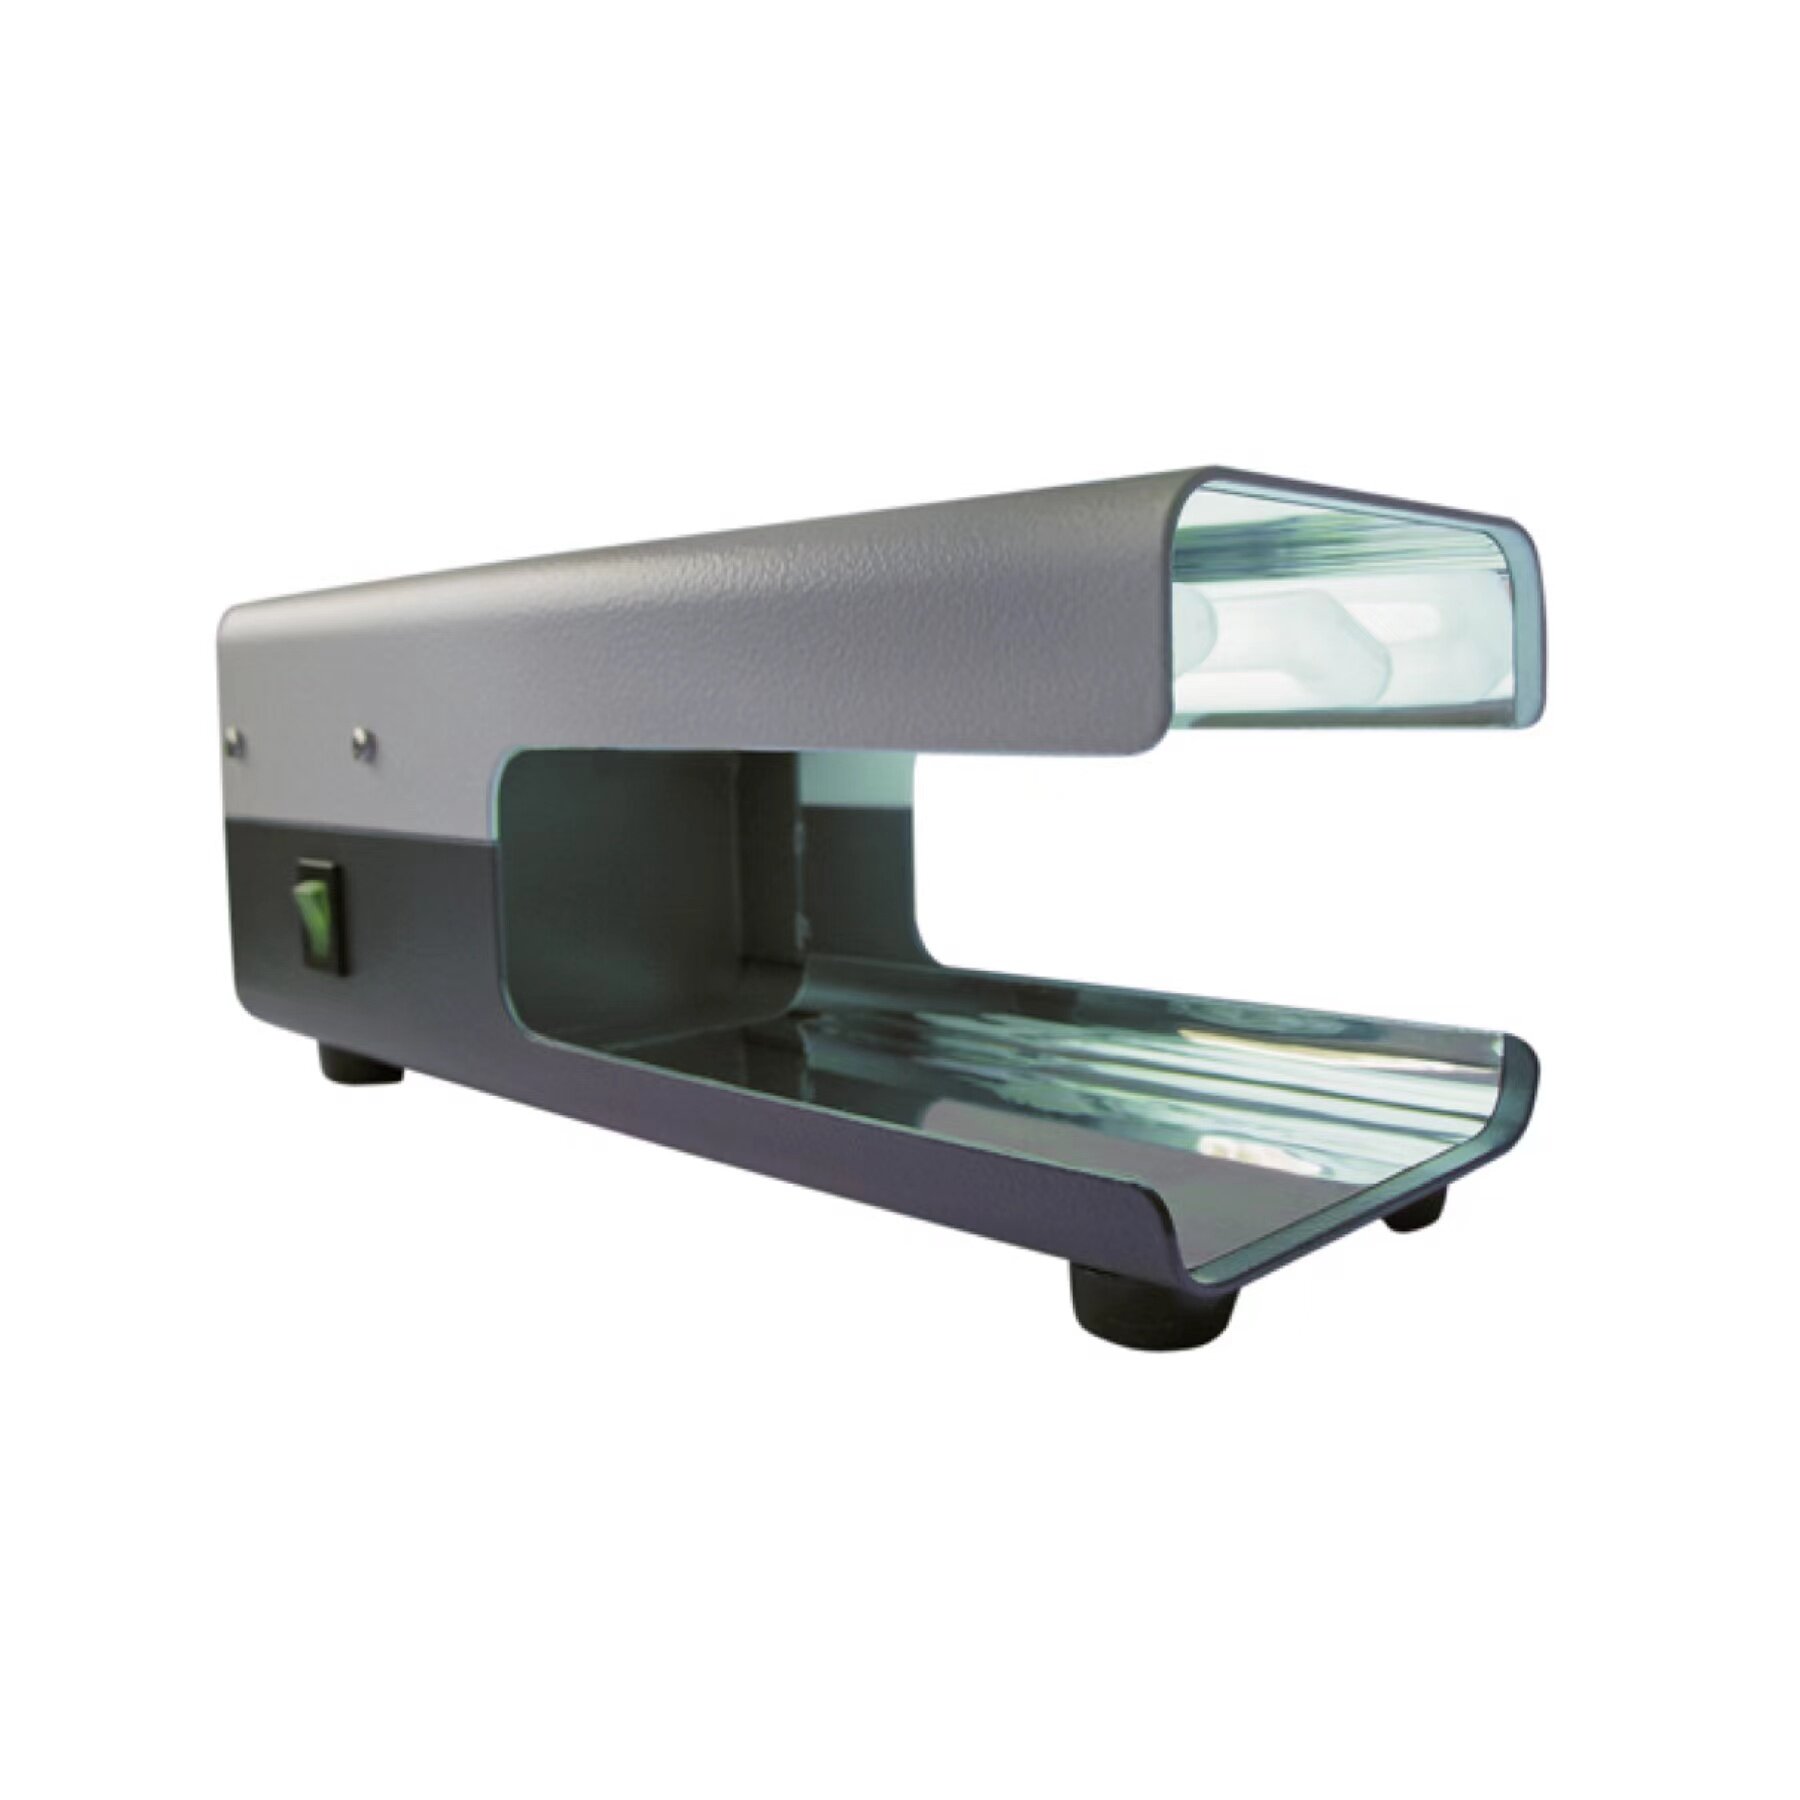 Open-ended UV-curing unit